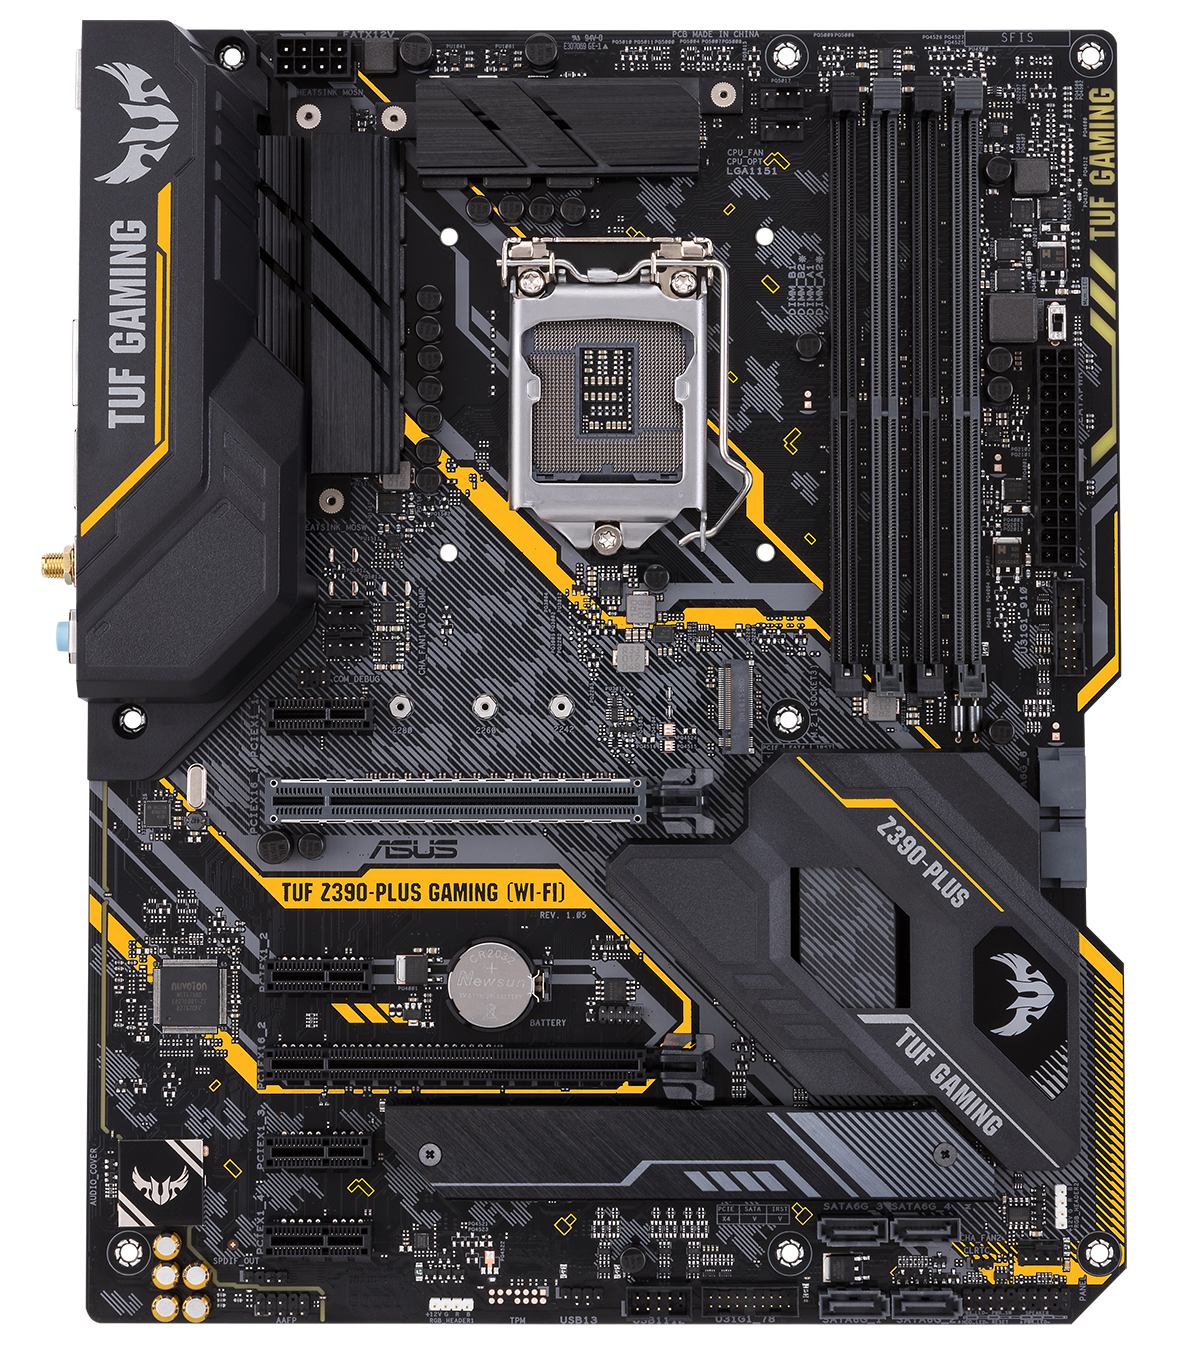 ASUS TUF Z390 Plus Gaming Wi-Fi - Intel Z390 Motherboard Overview 